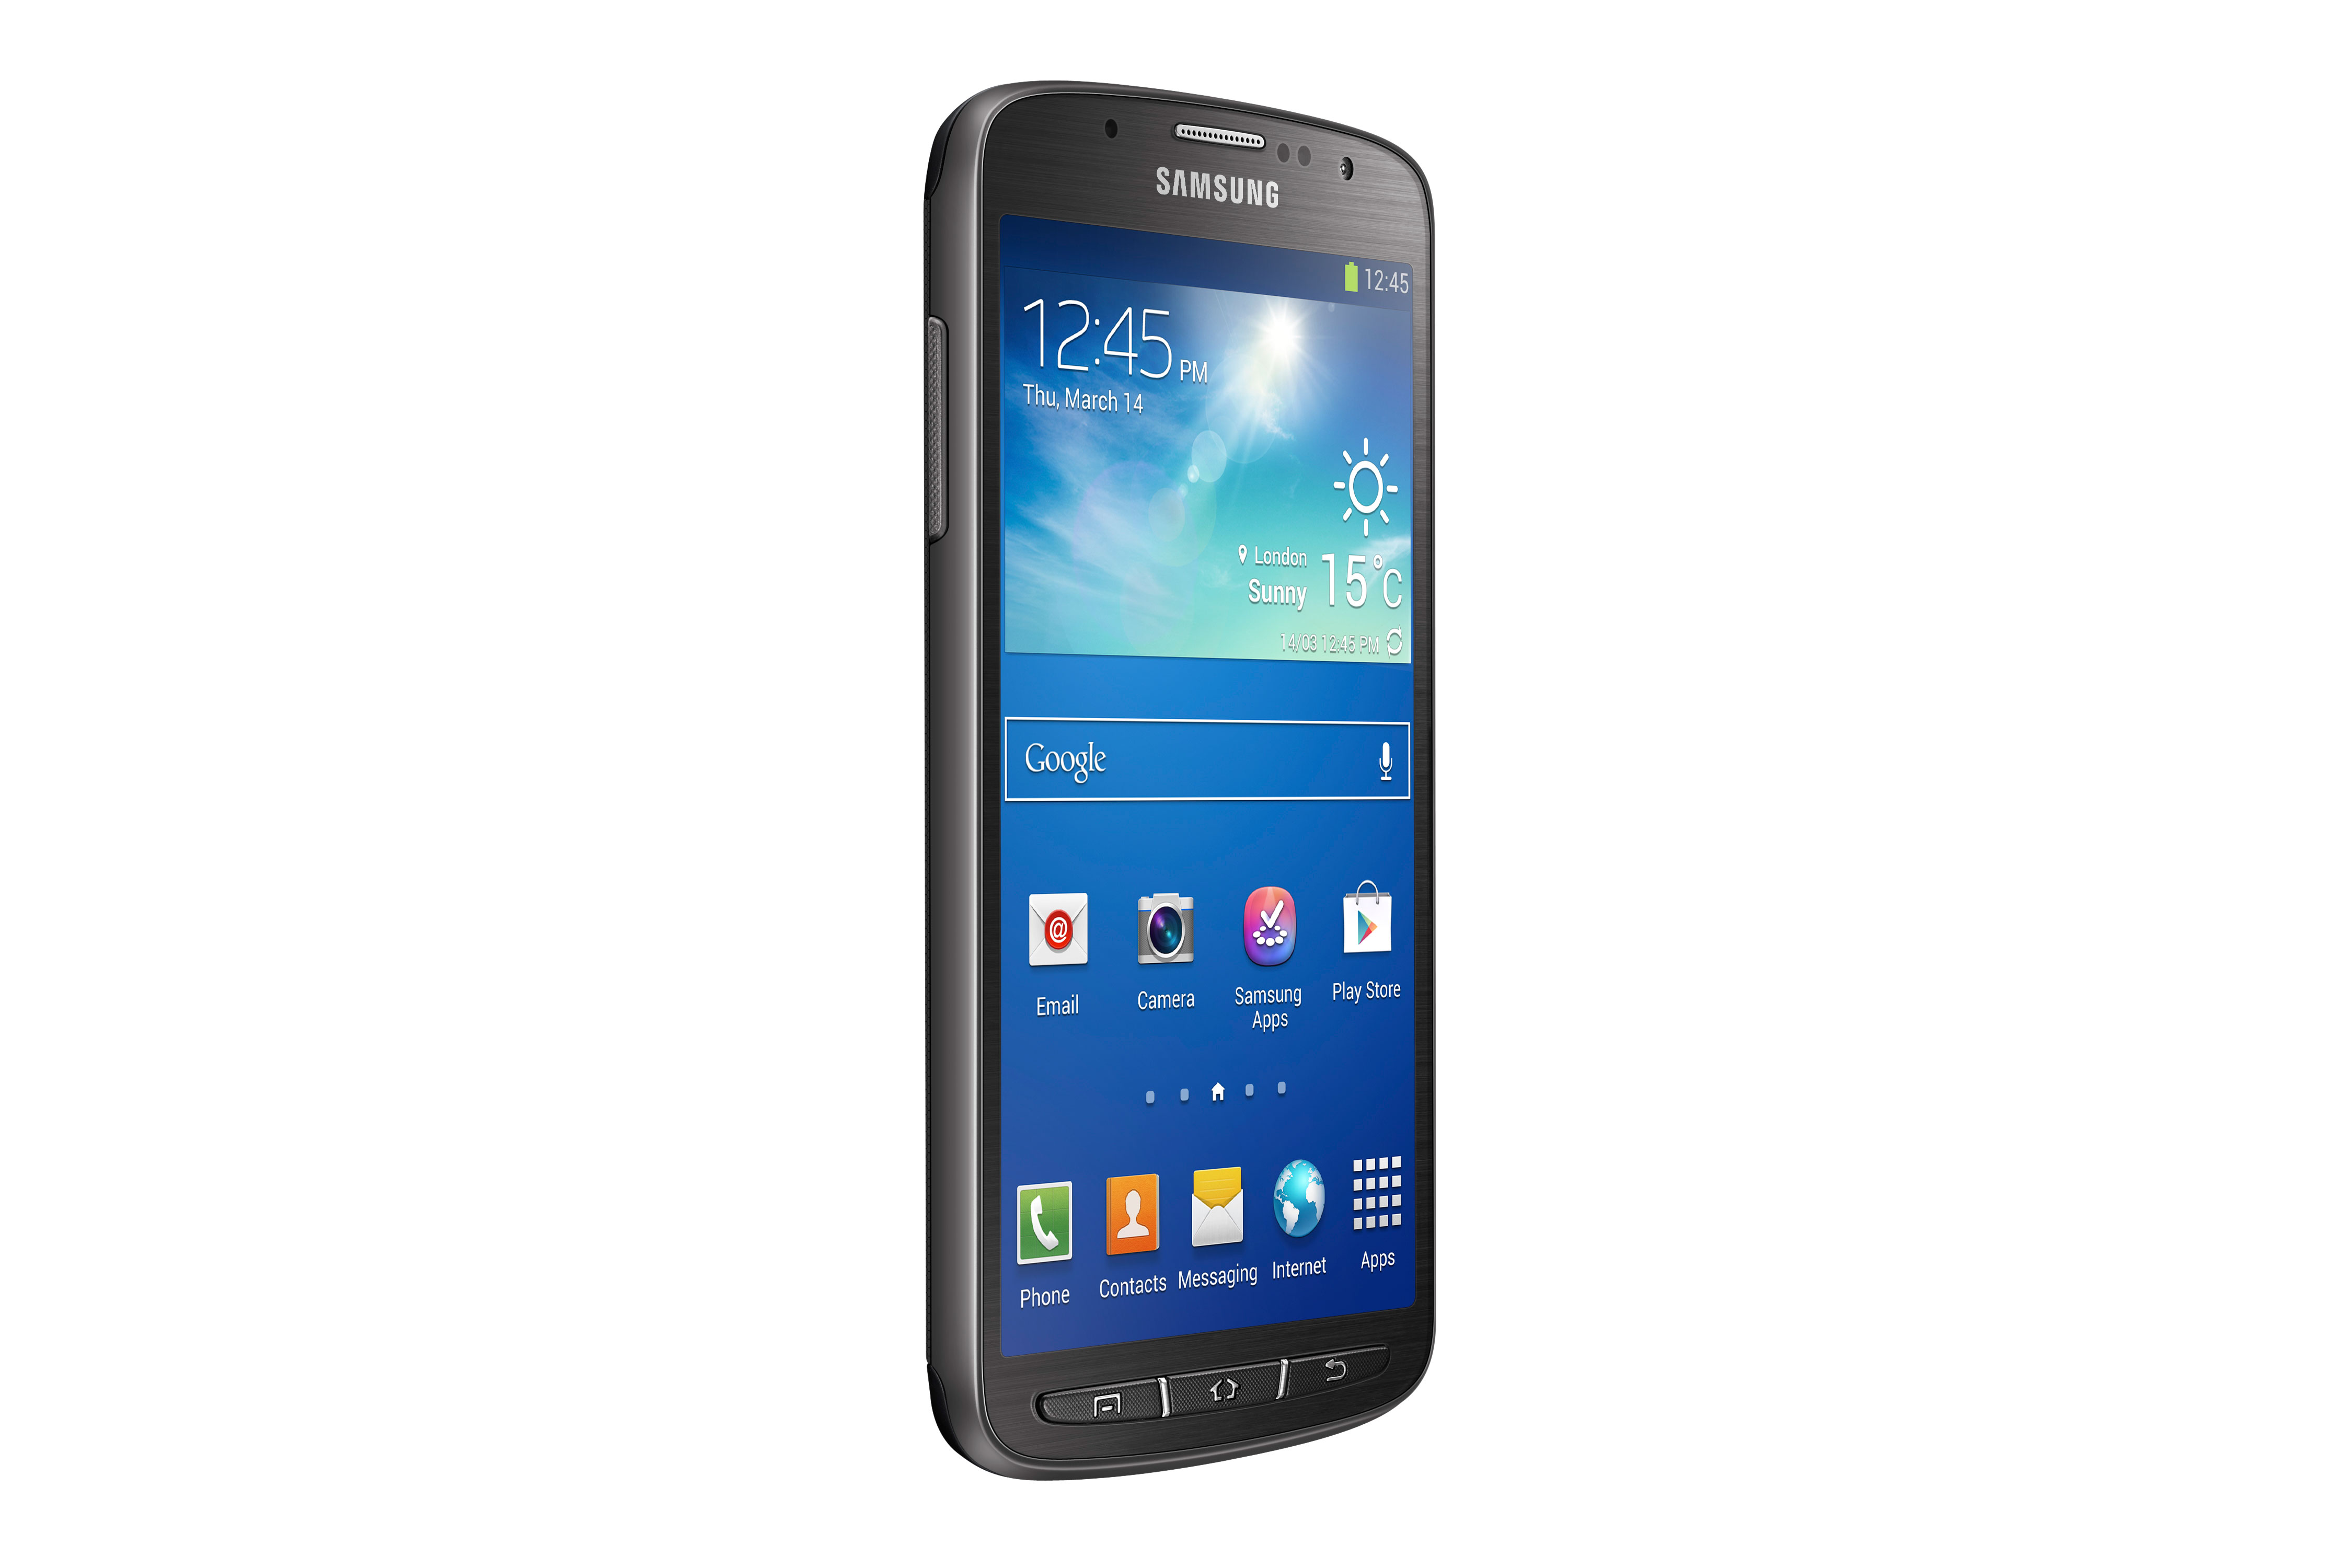 Samsung Galaxy S4 Active gets official - SamMobile4500 x 3000